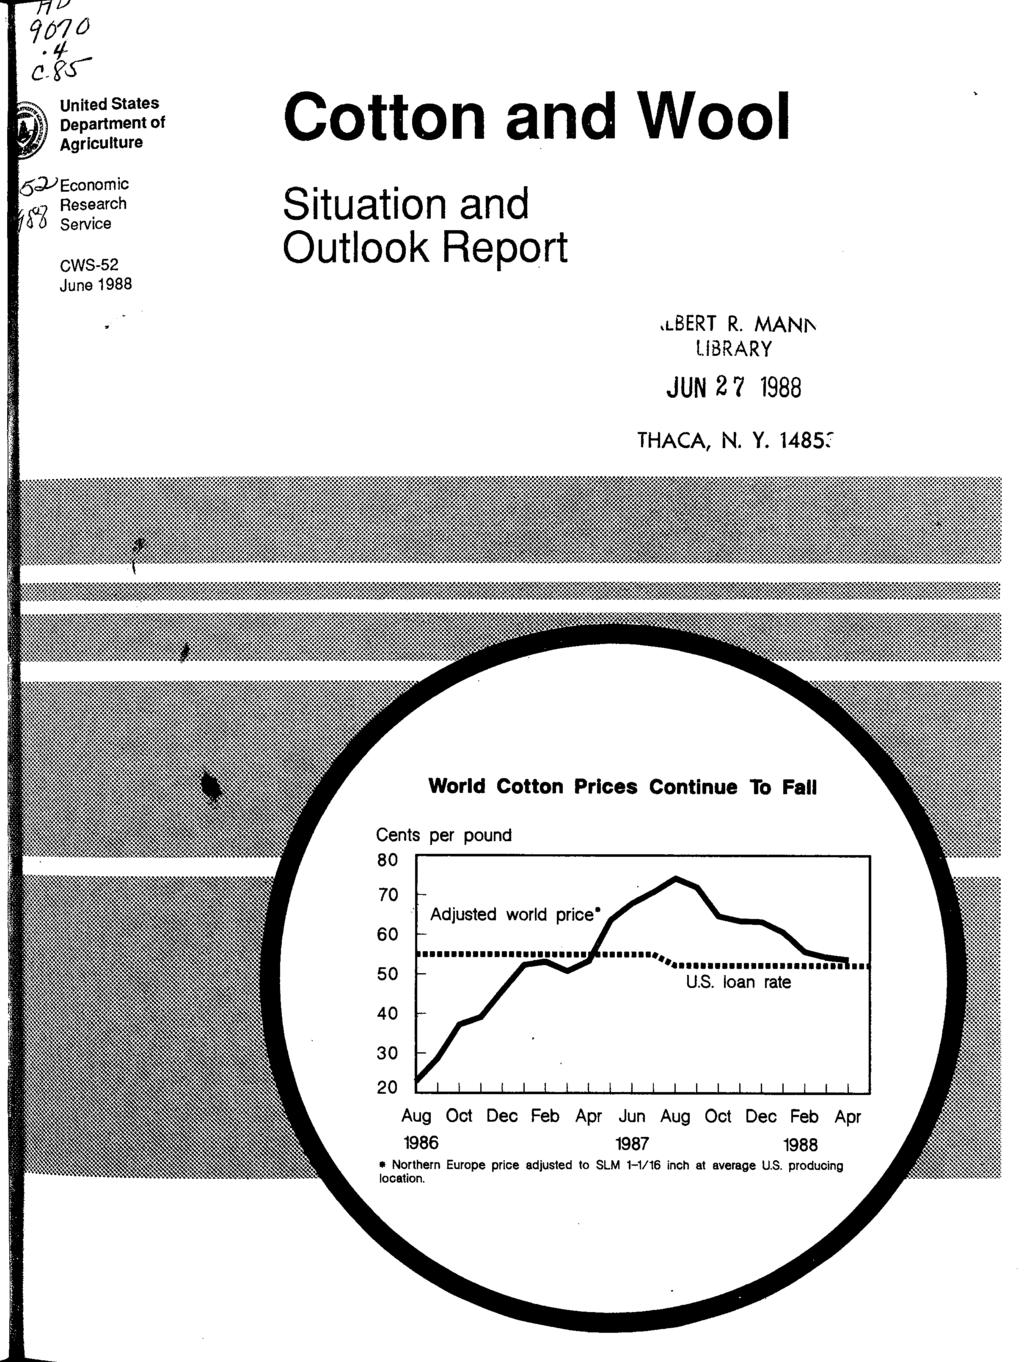 United States Department of Agriculture Economic Research Service CWS-52 June 1988 Cotton and Wool Situation and Outlook Report,LBERT R. MANf\ LIBRARY JUN 2 7 1988 THACA, N. Y.